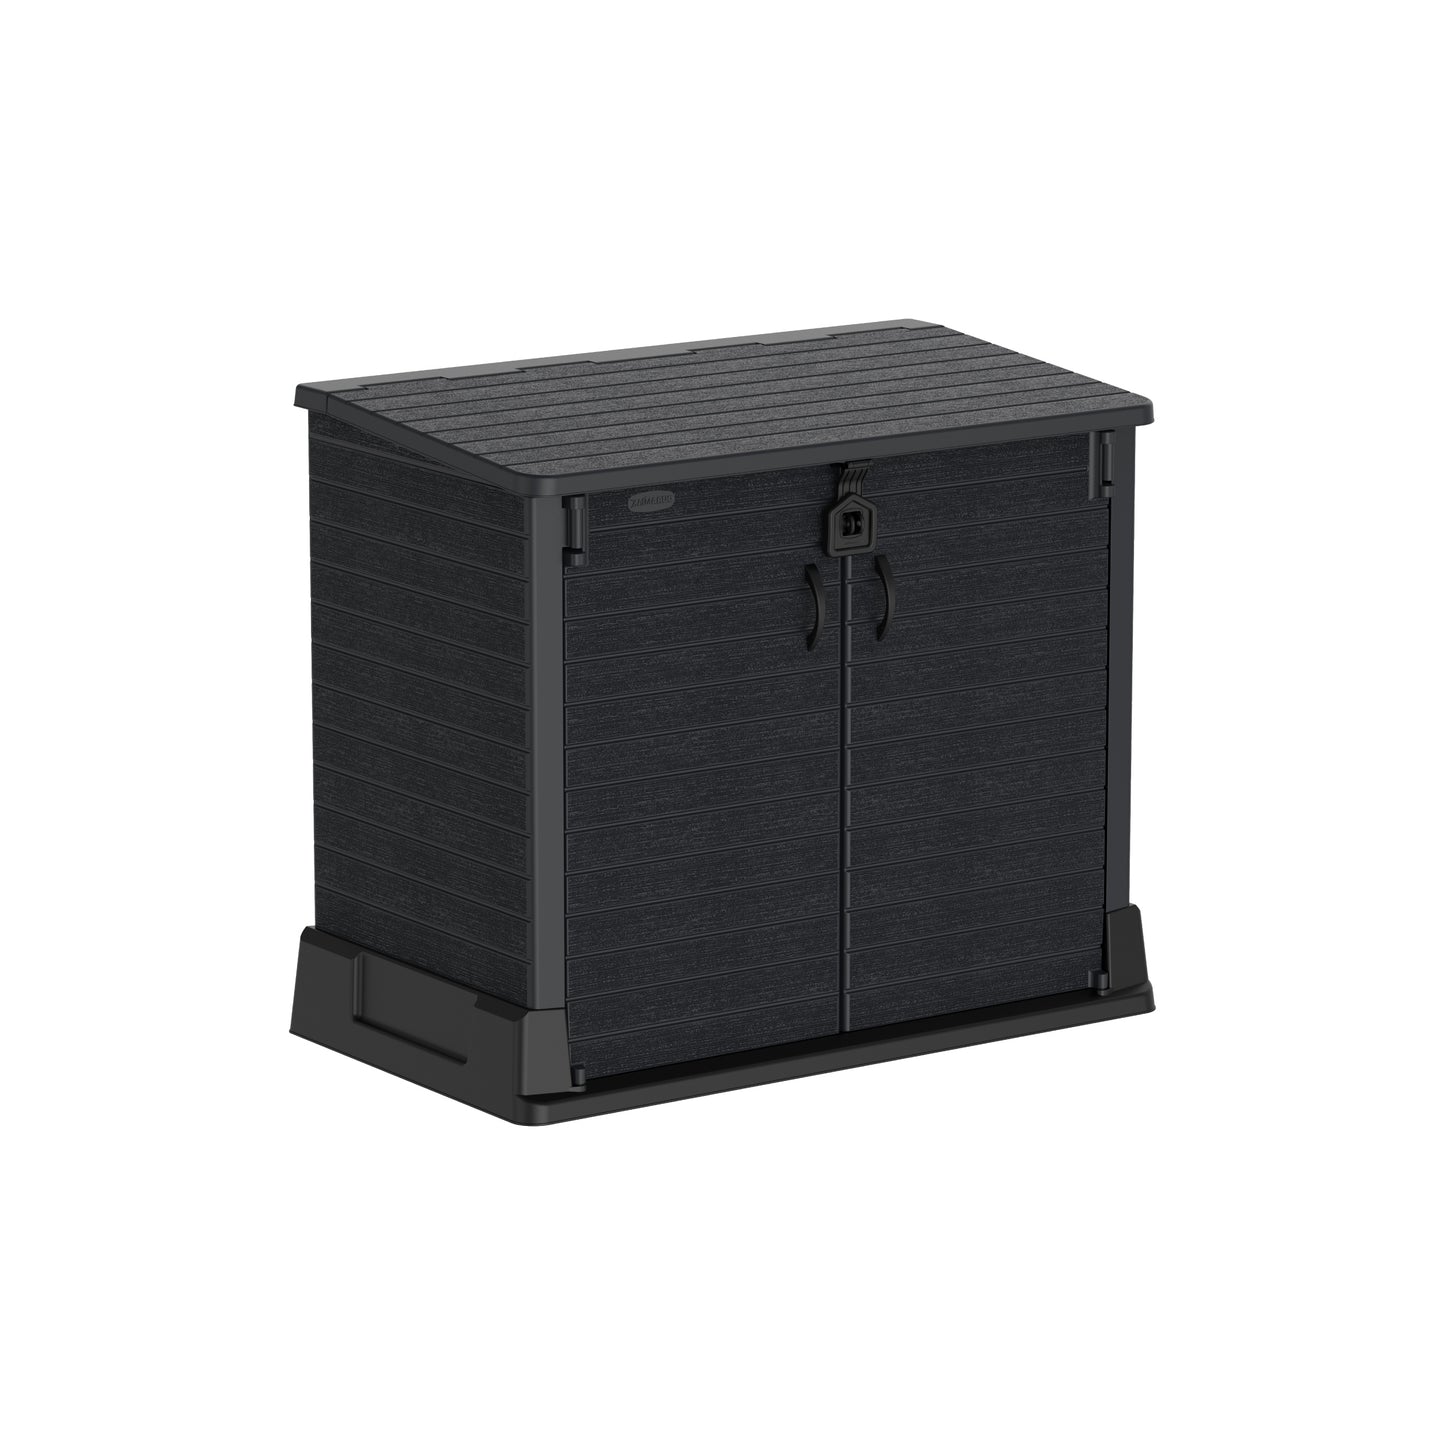 Dark Grey  plastic garden storage enhancing with top entry and broad doors for outdoor use.